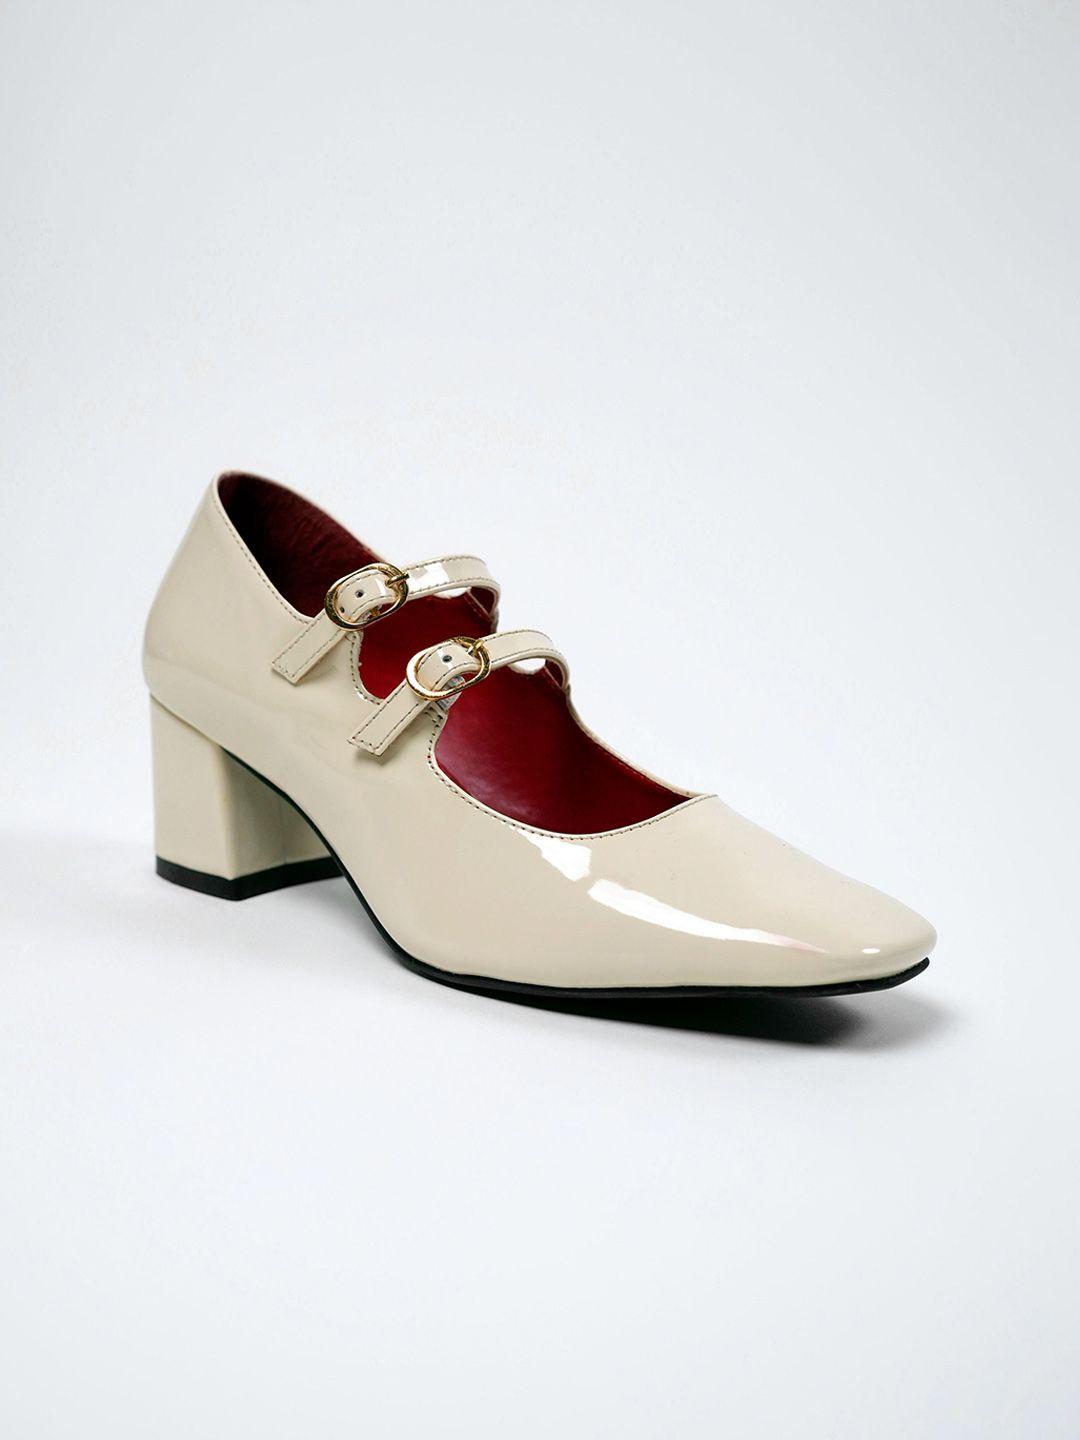 theater kelly swan square toe block pumps with buckles